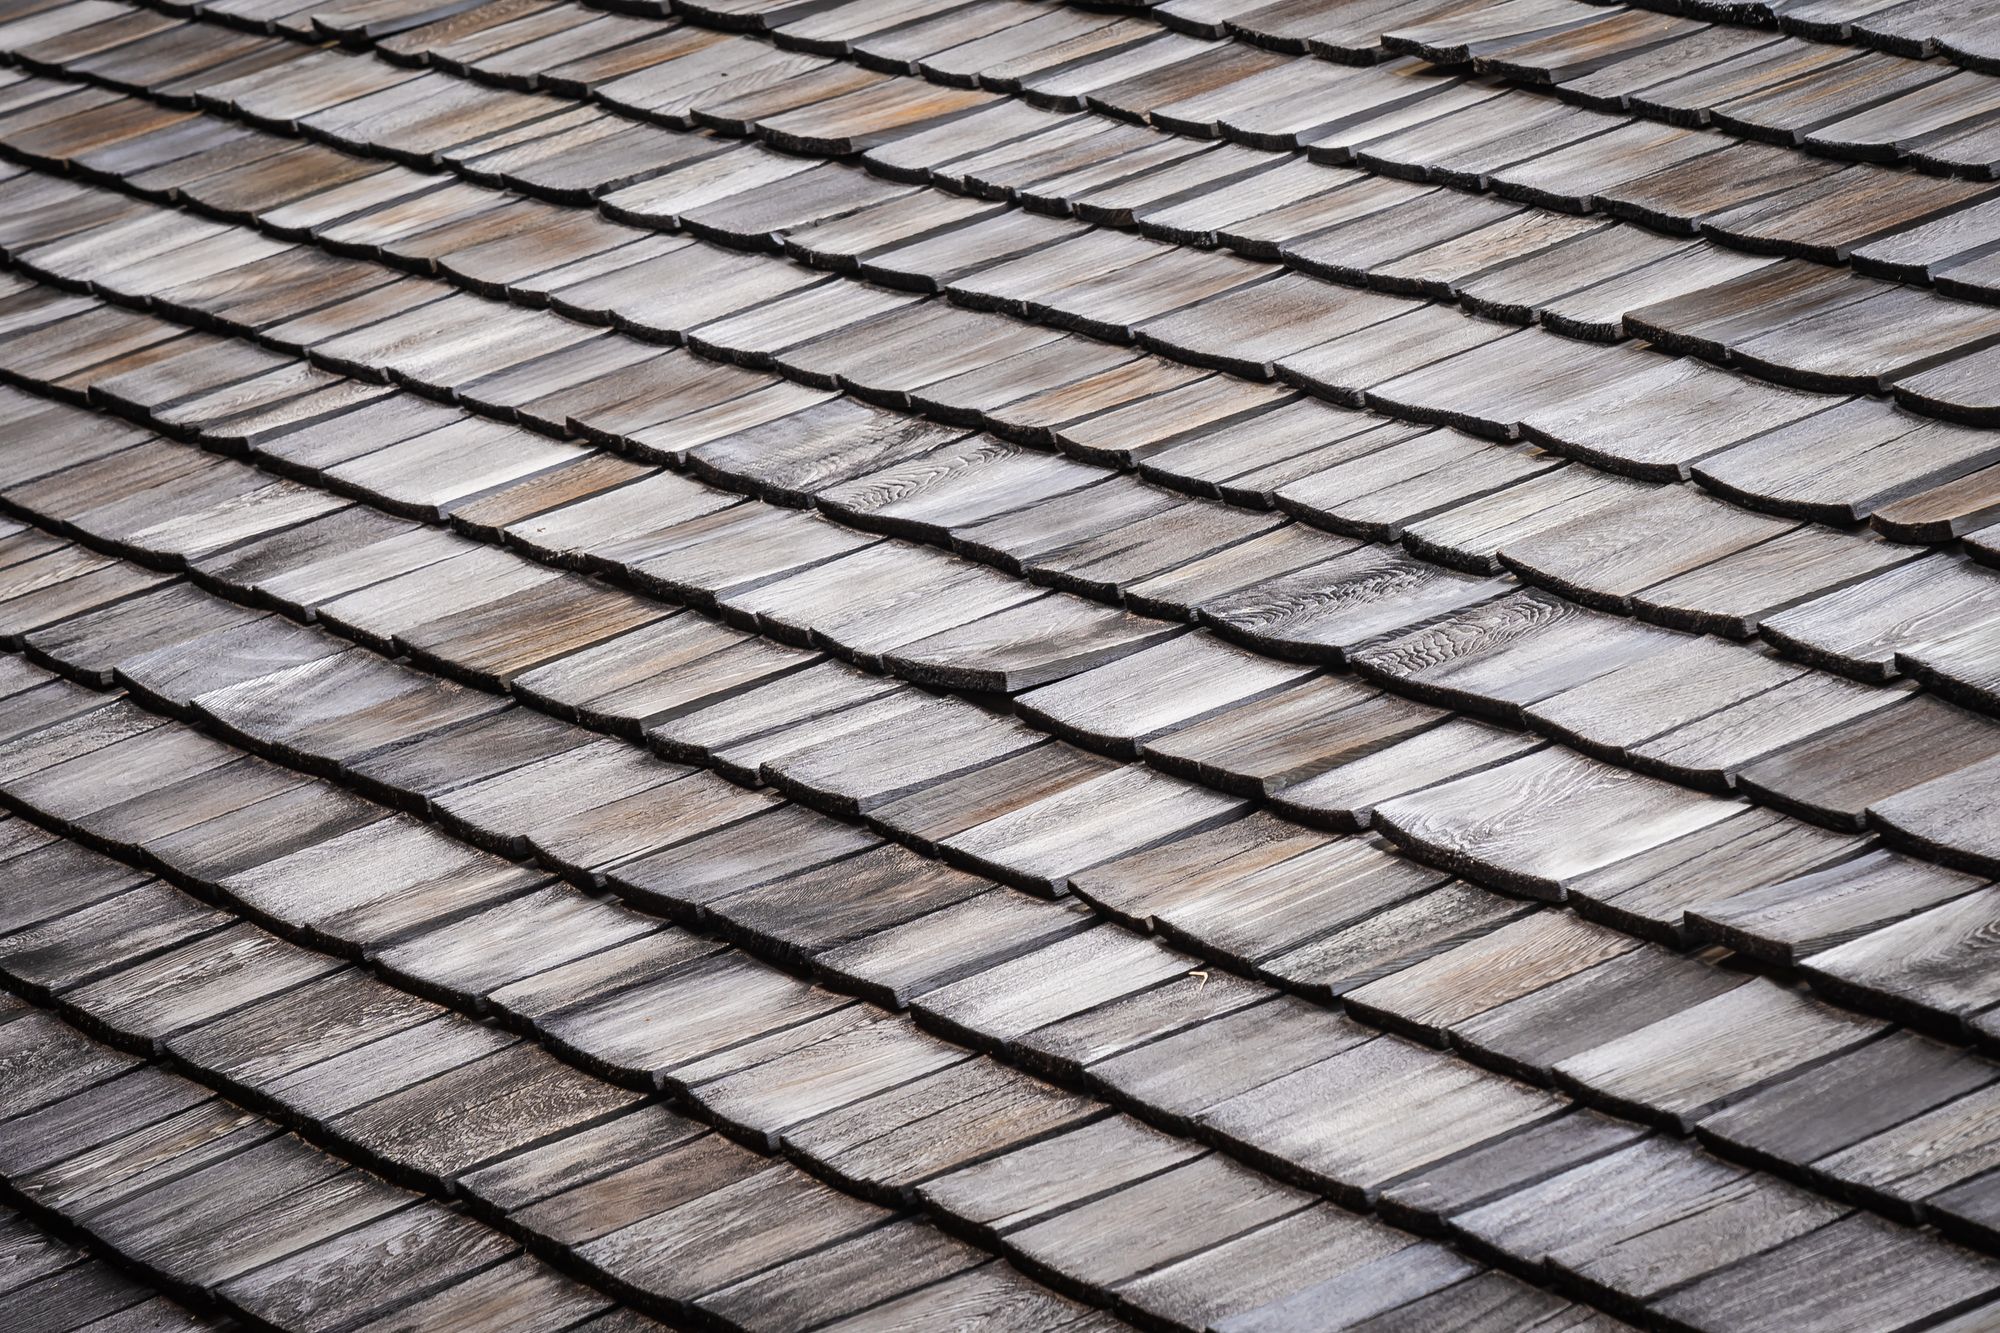 Asphalt Shingles pros, cons and estimated costs